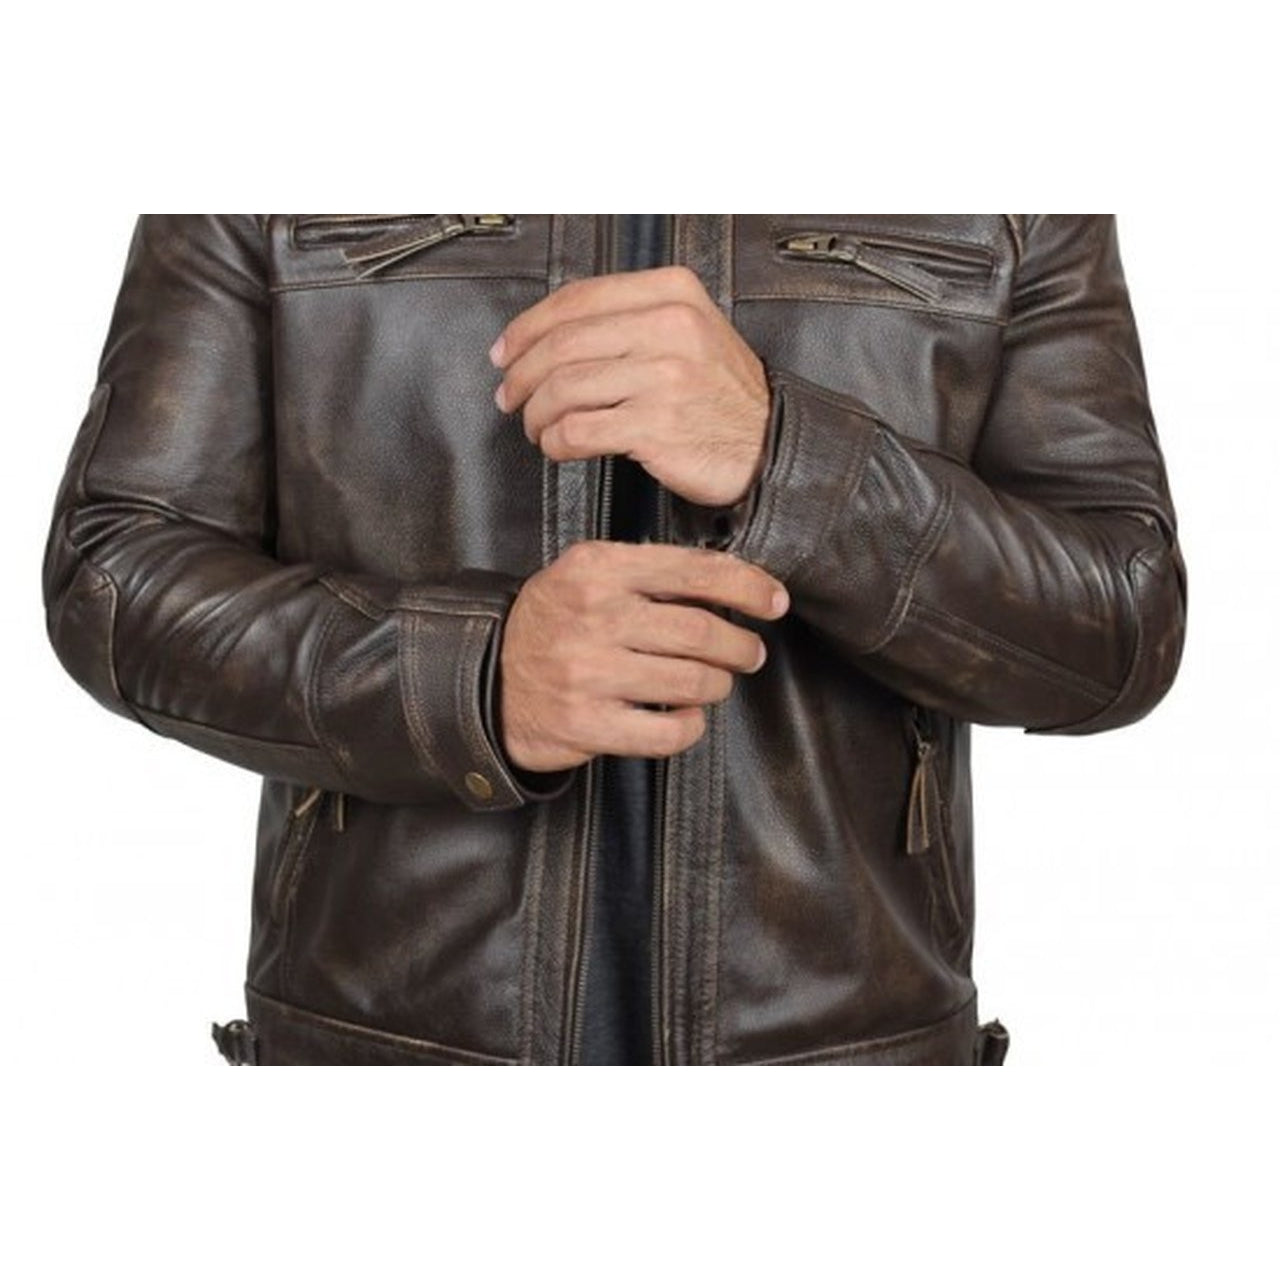 Quilted Distressed Brown Leather Jacket Men - Leather Jacket